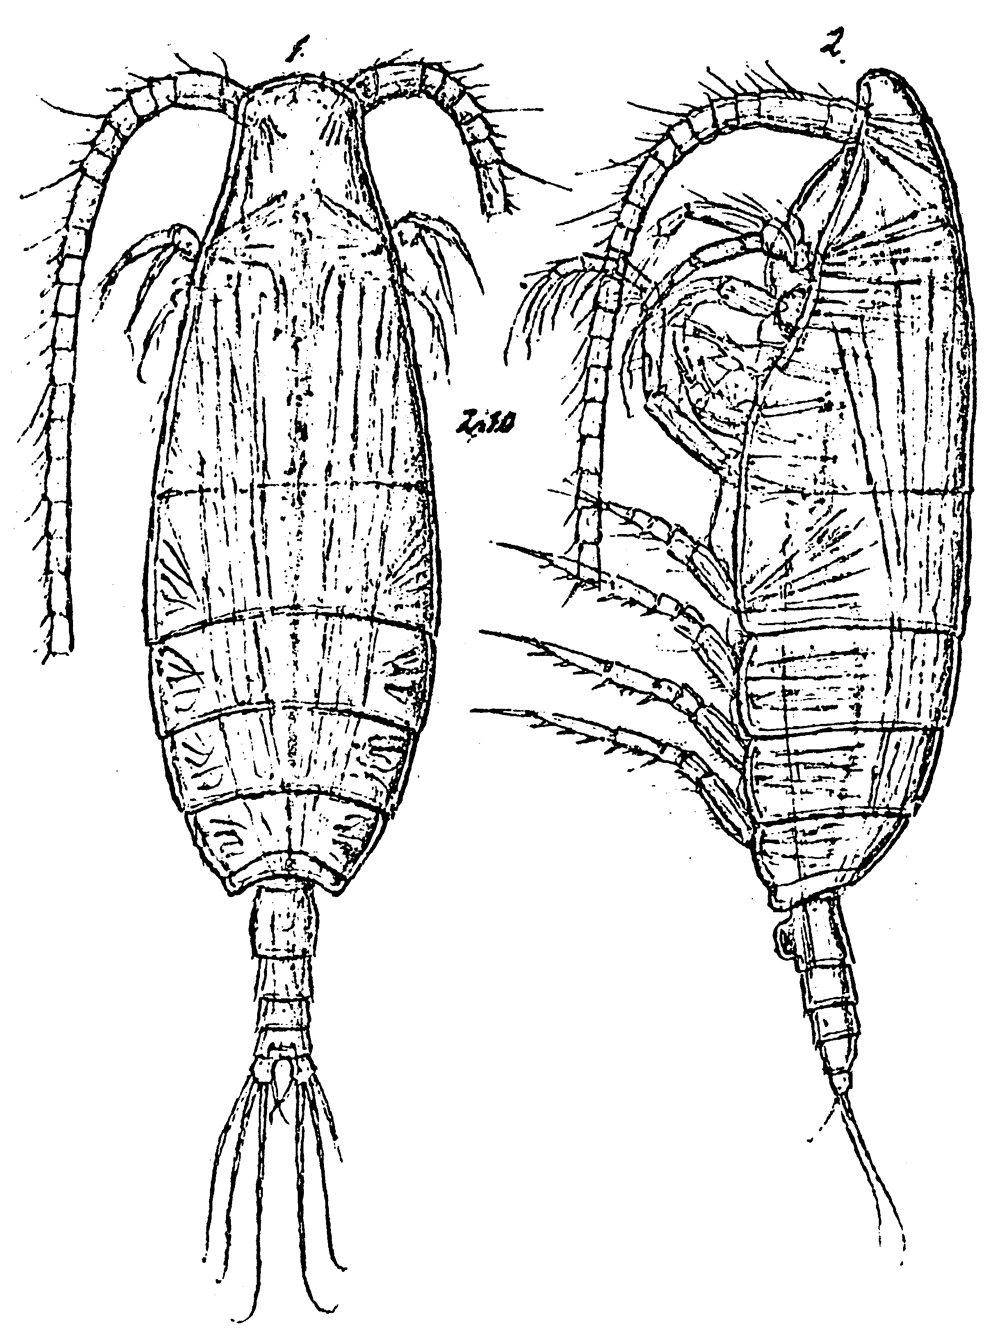 Species Spinocalanus angusticeps - Plate 9 of morphological figures